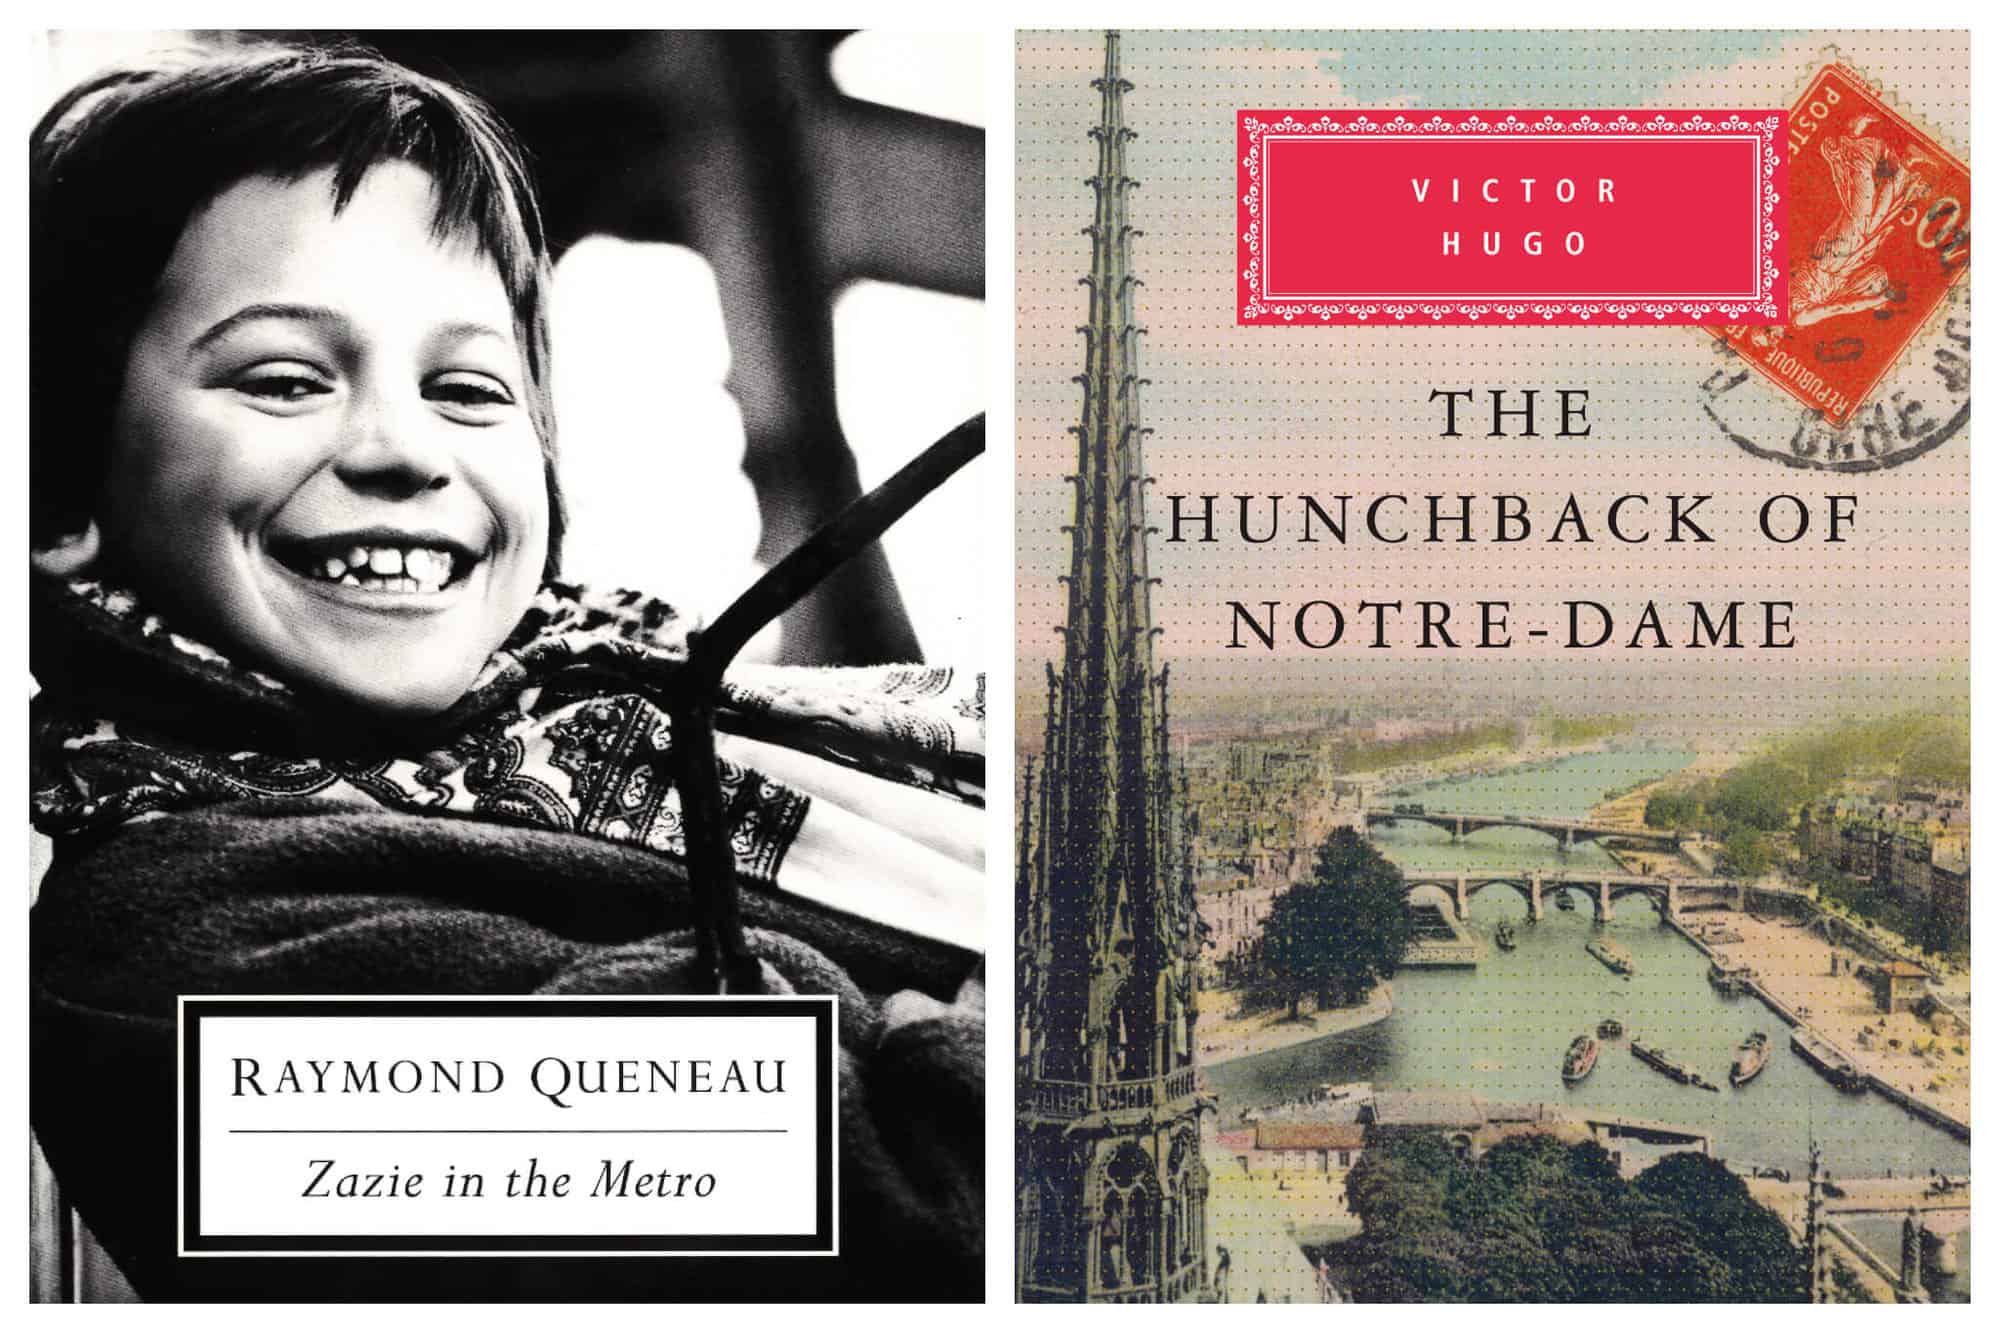 Left: the cover of the book "Zazie in the Metro" by Raymong Queneau. The cover features a black and white photo of a child smiling. The title and the name of the author are written in black inside a white box at the bottom of the cover. Right: the cover of "The Hunchback of Notre-Dame" by Victor Hugo. The cover features an illustration of the Seine River in Paris. The authors name is written in white inside a red box at the top of the cover and the title of the book is written in black and is set against the illustration.